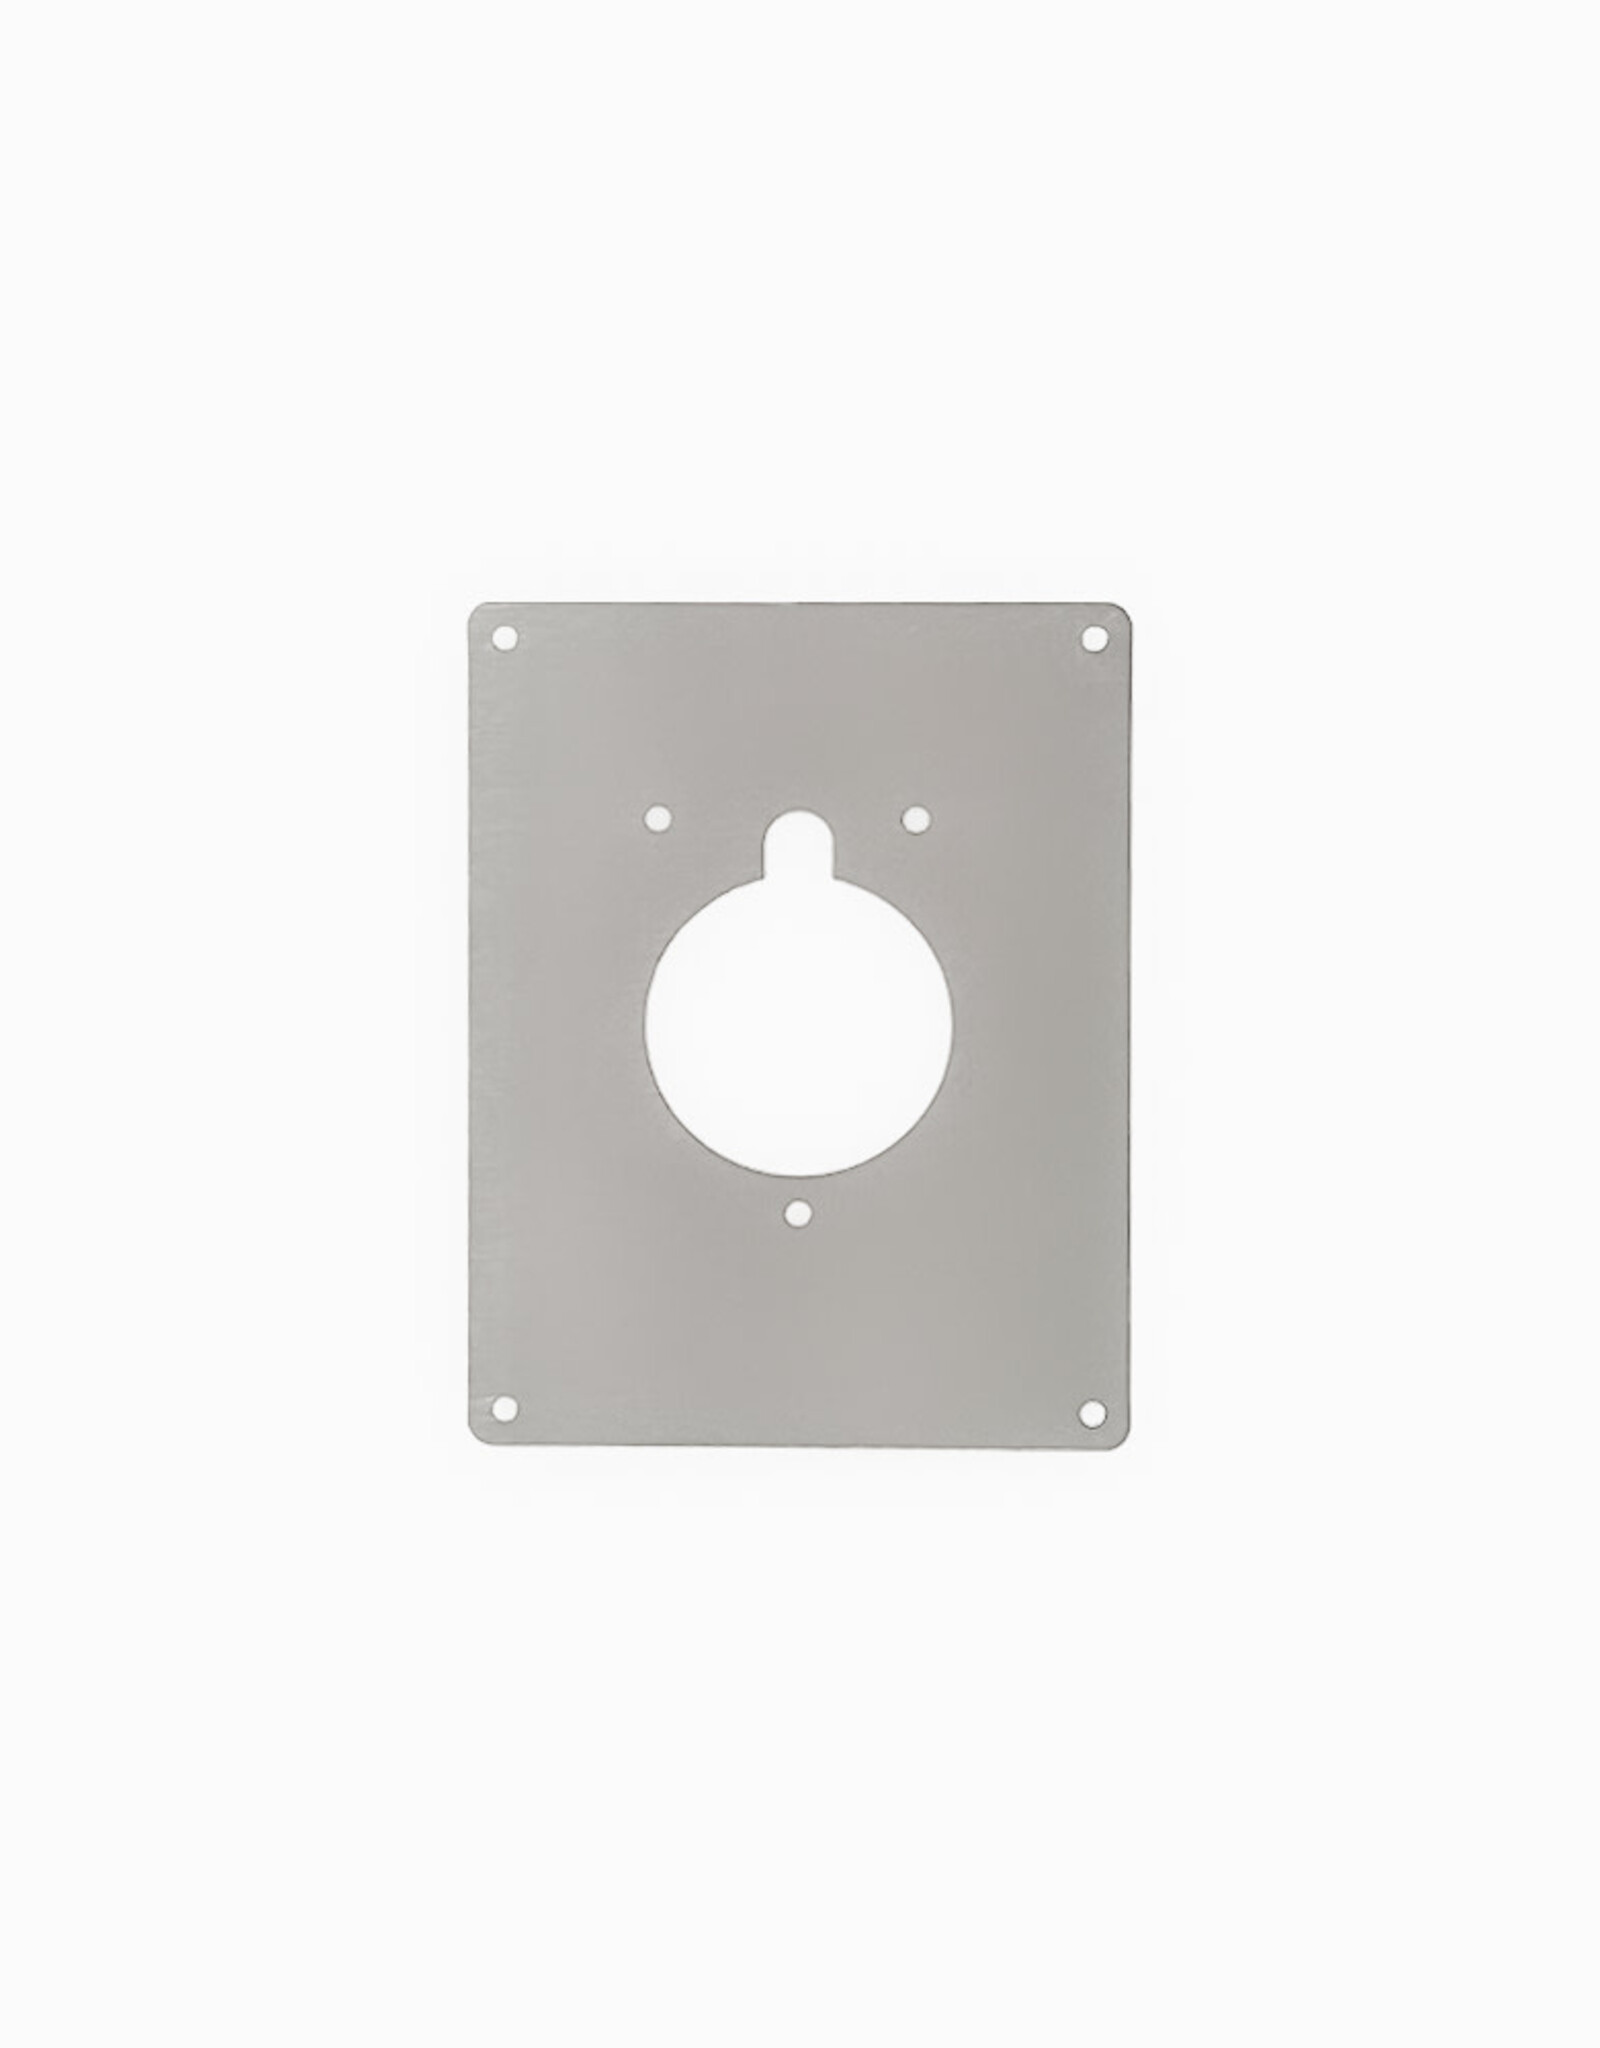 Renaissance Cooking Systems Renaissance Cooking Systems Timer Mounting Plate Only - RGT1P